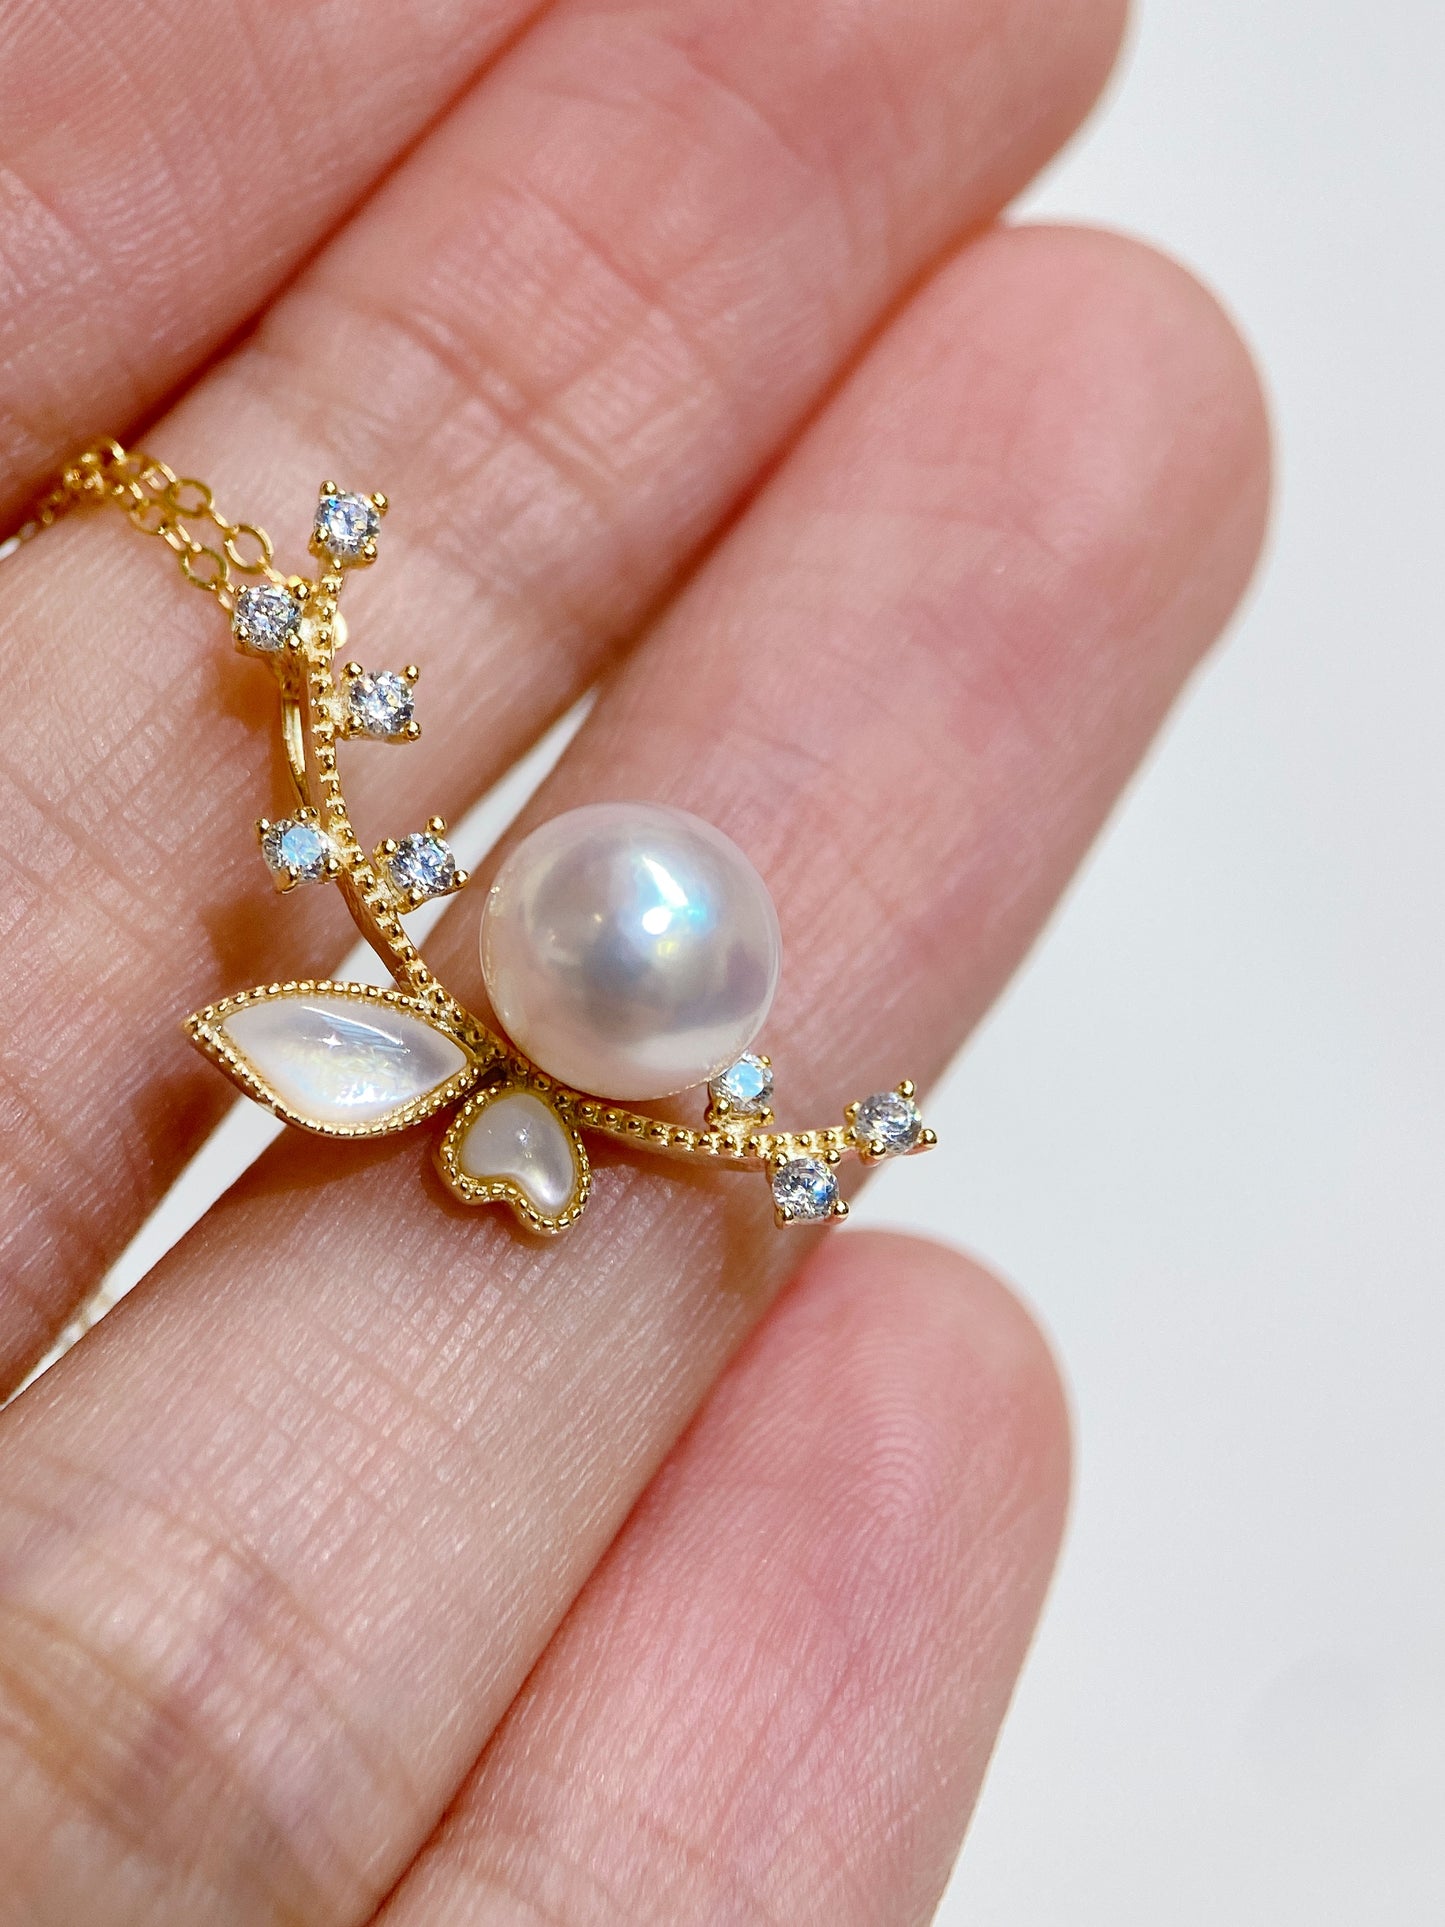 Yellow Gold Plated Sterling Silver Freshwater Pearl Necklace, NL4, NL5